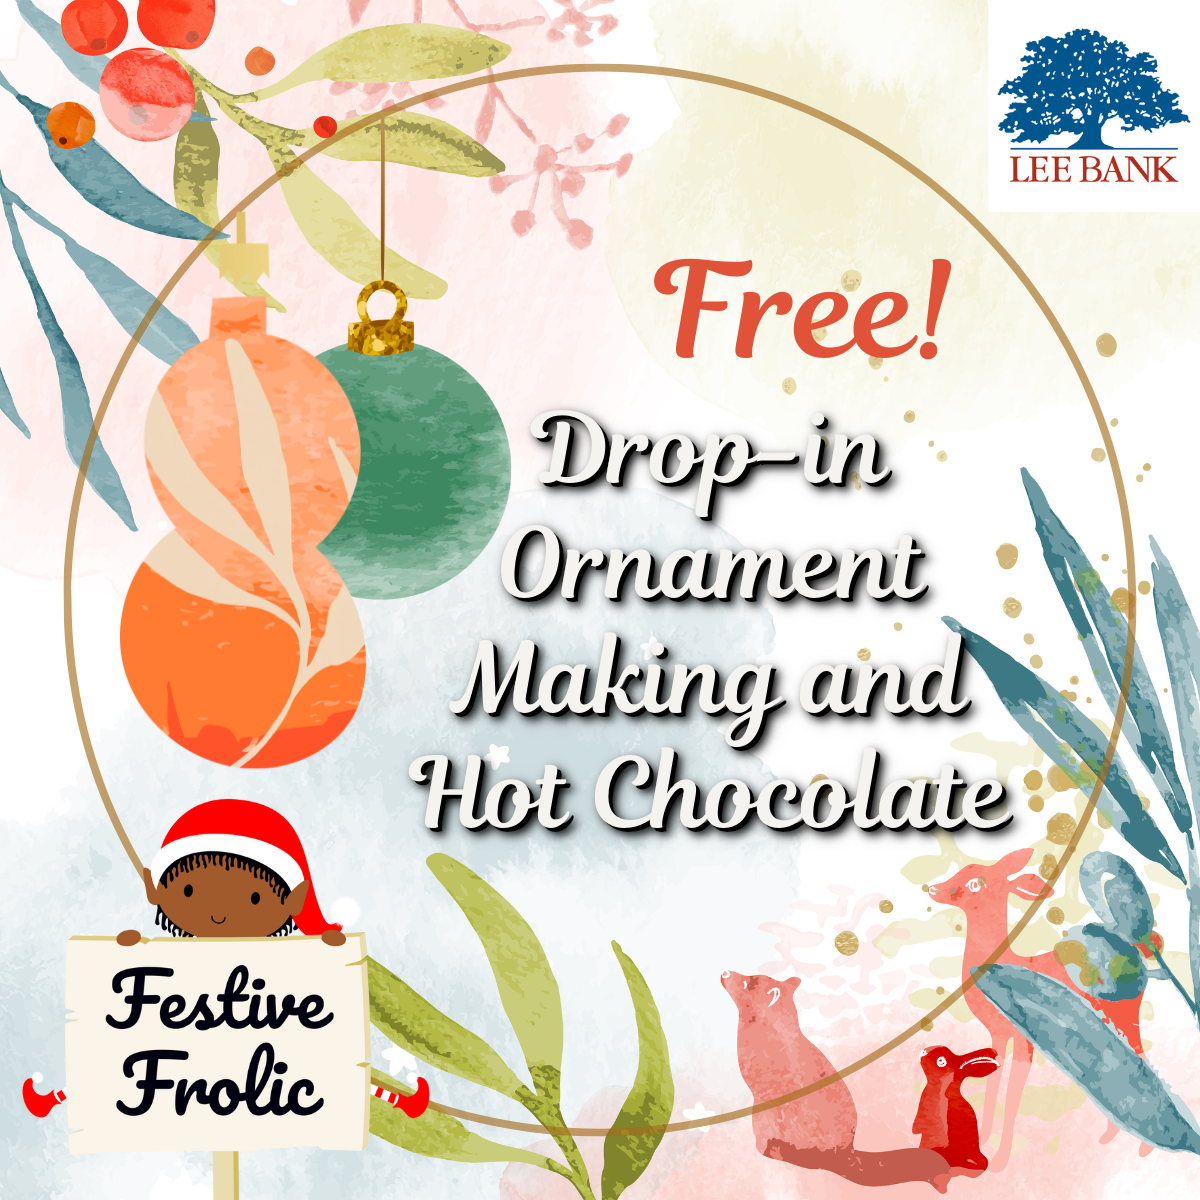 Free Drop-in Ornament Making and Hot Chocolate at Lee Bank!